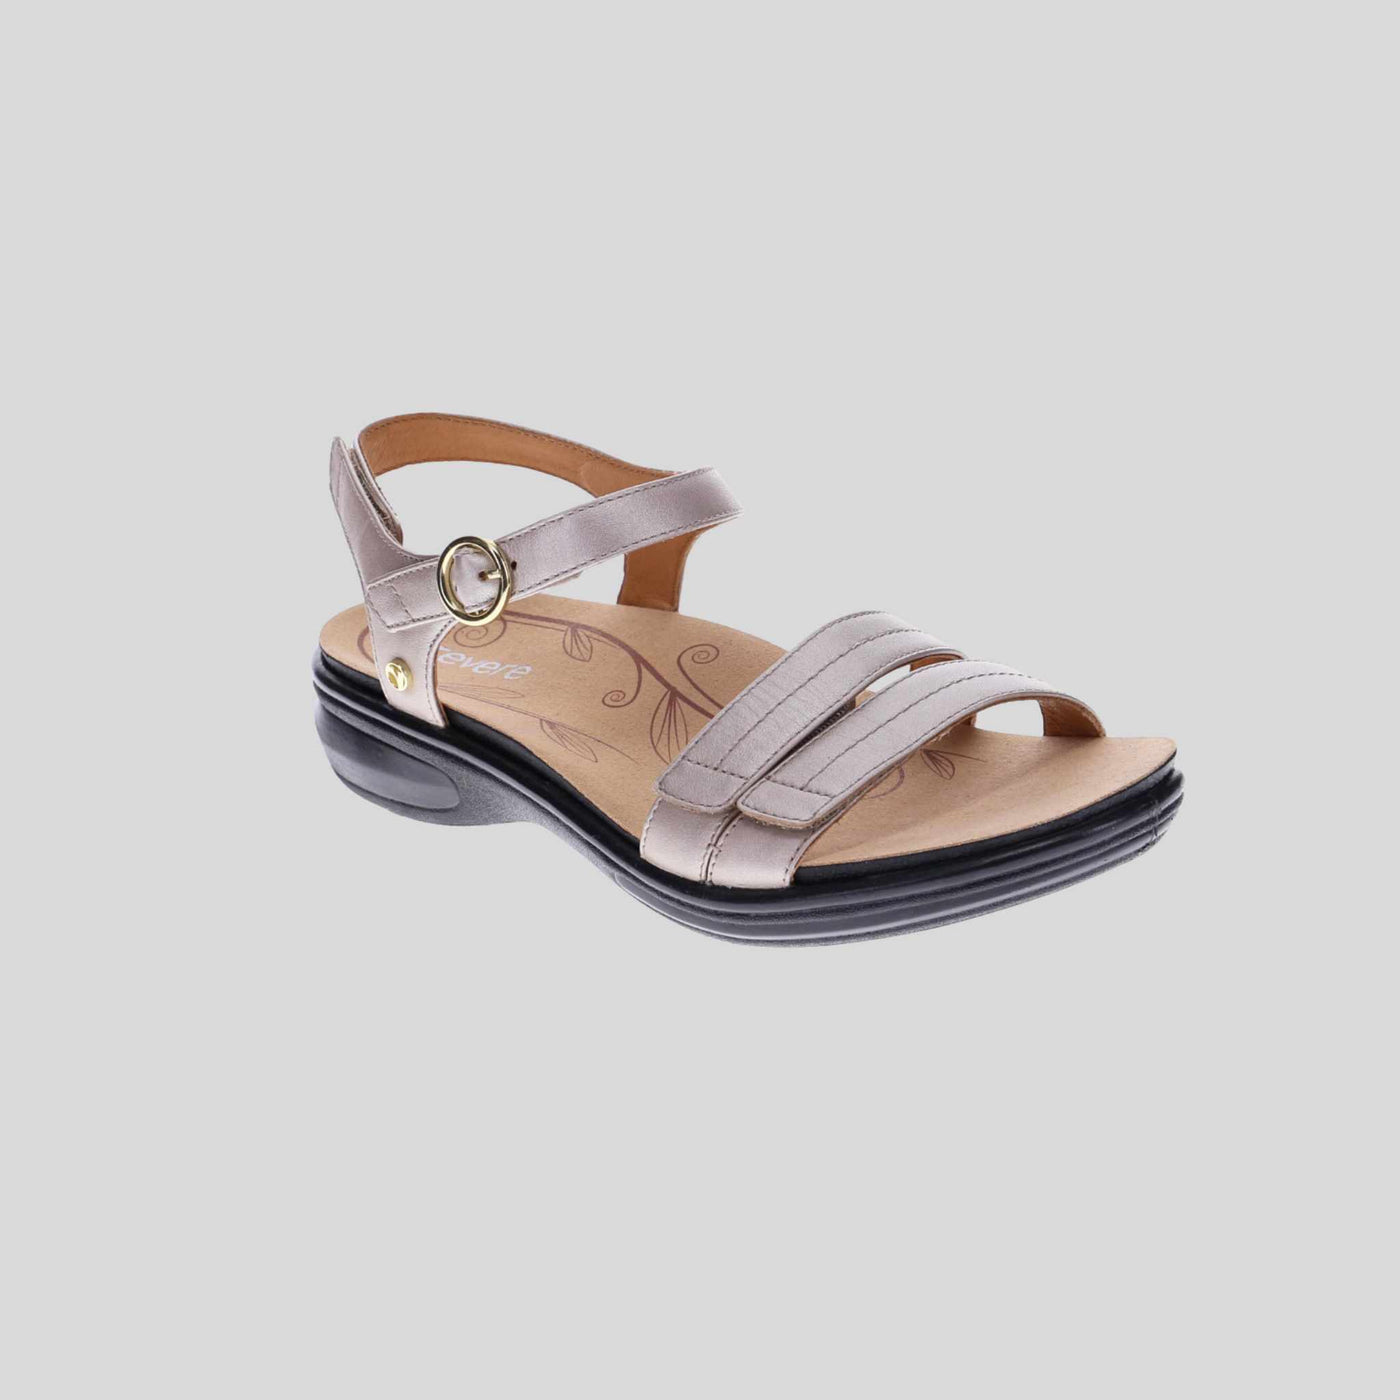 Arch Support womens sandals